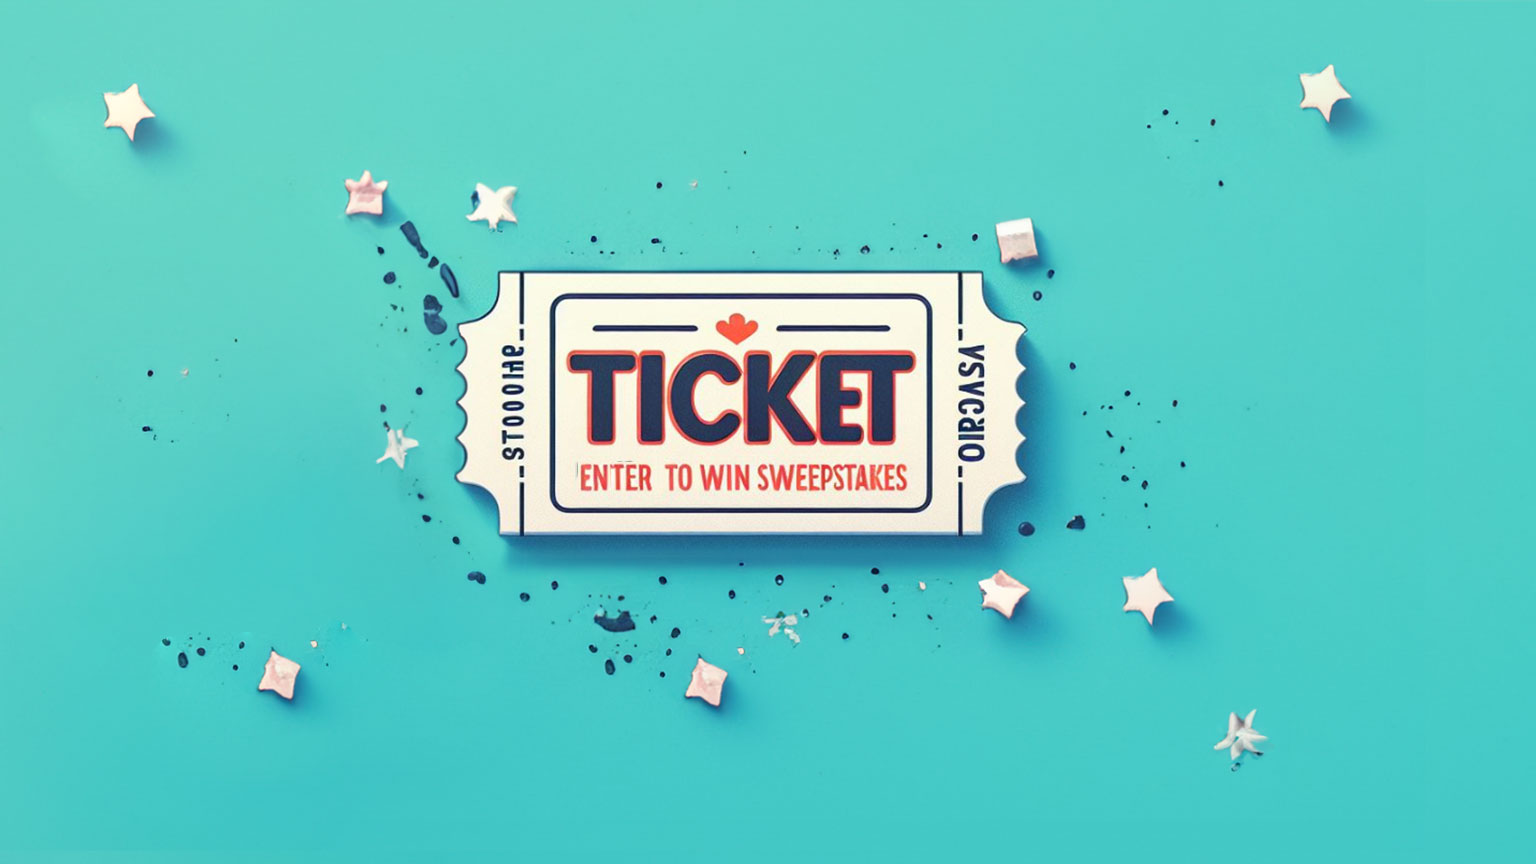 From Entries to Insights: Exploring the Results of Our Sweepstakes